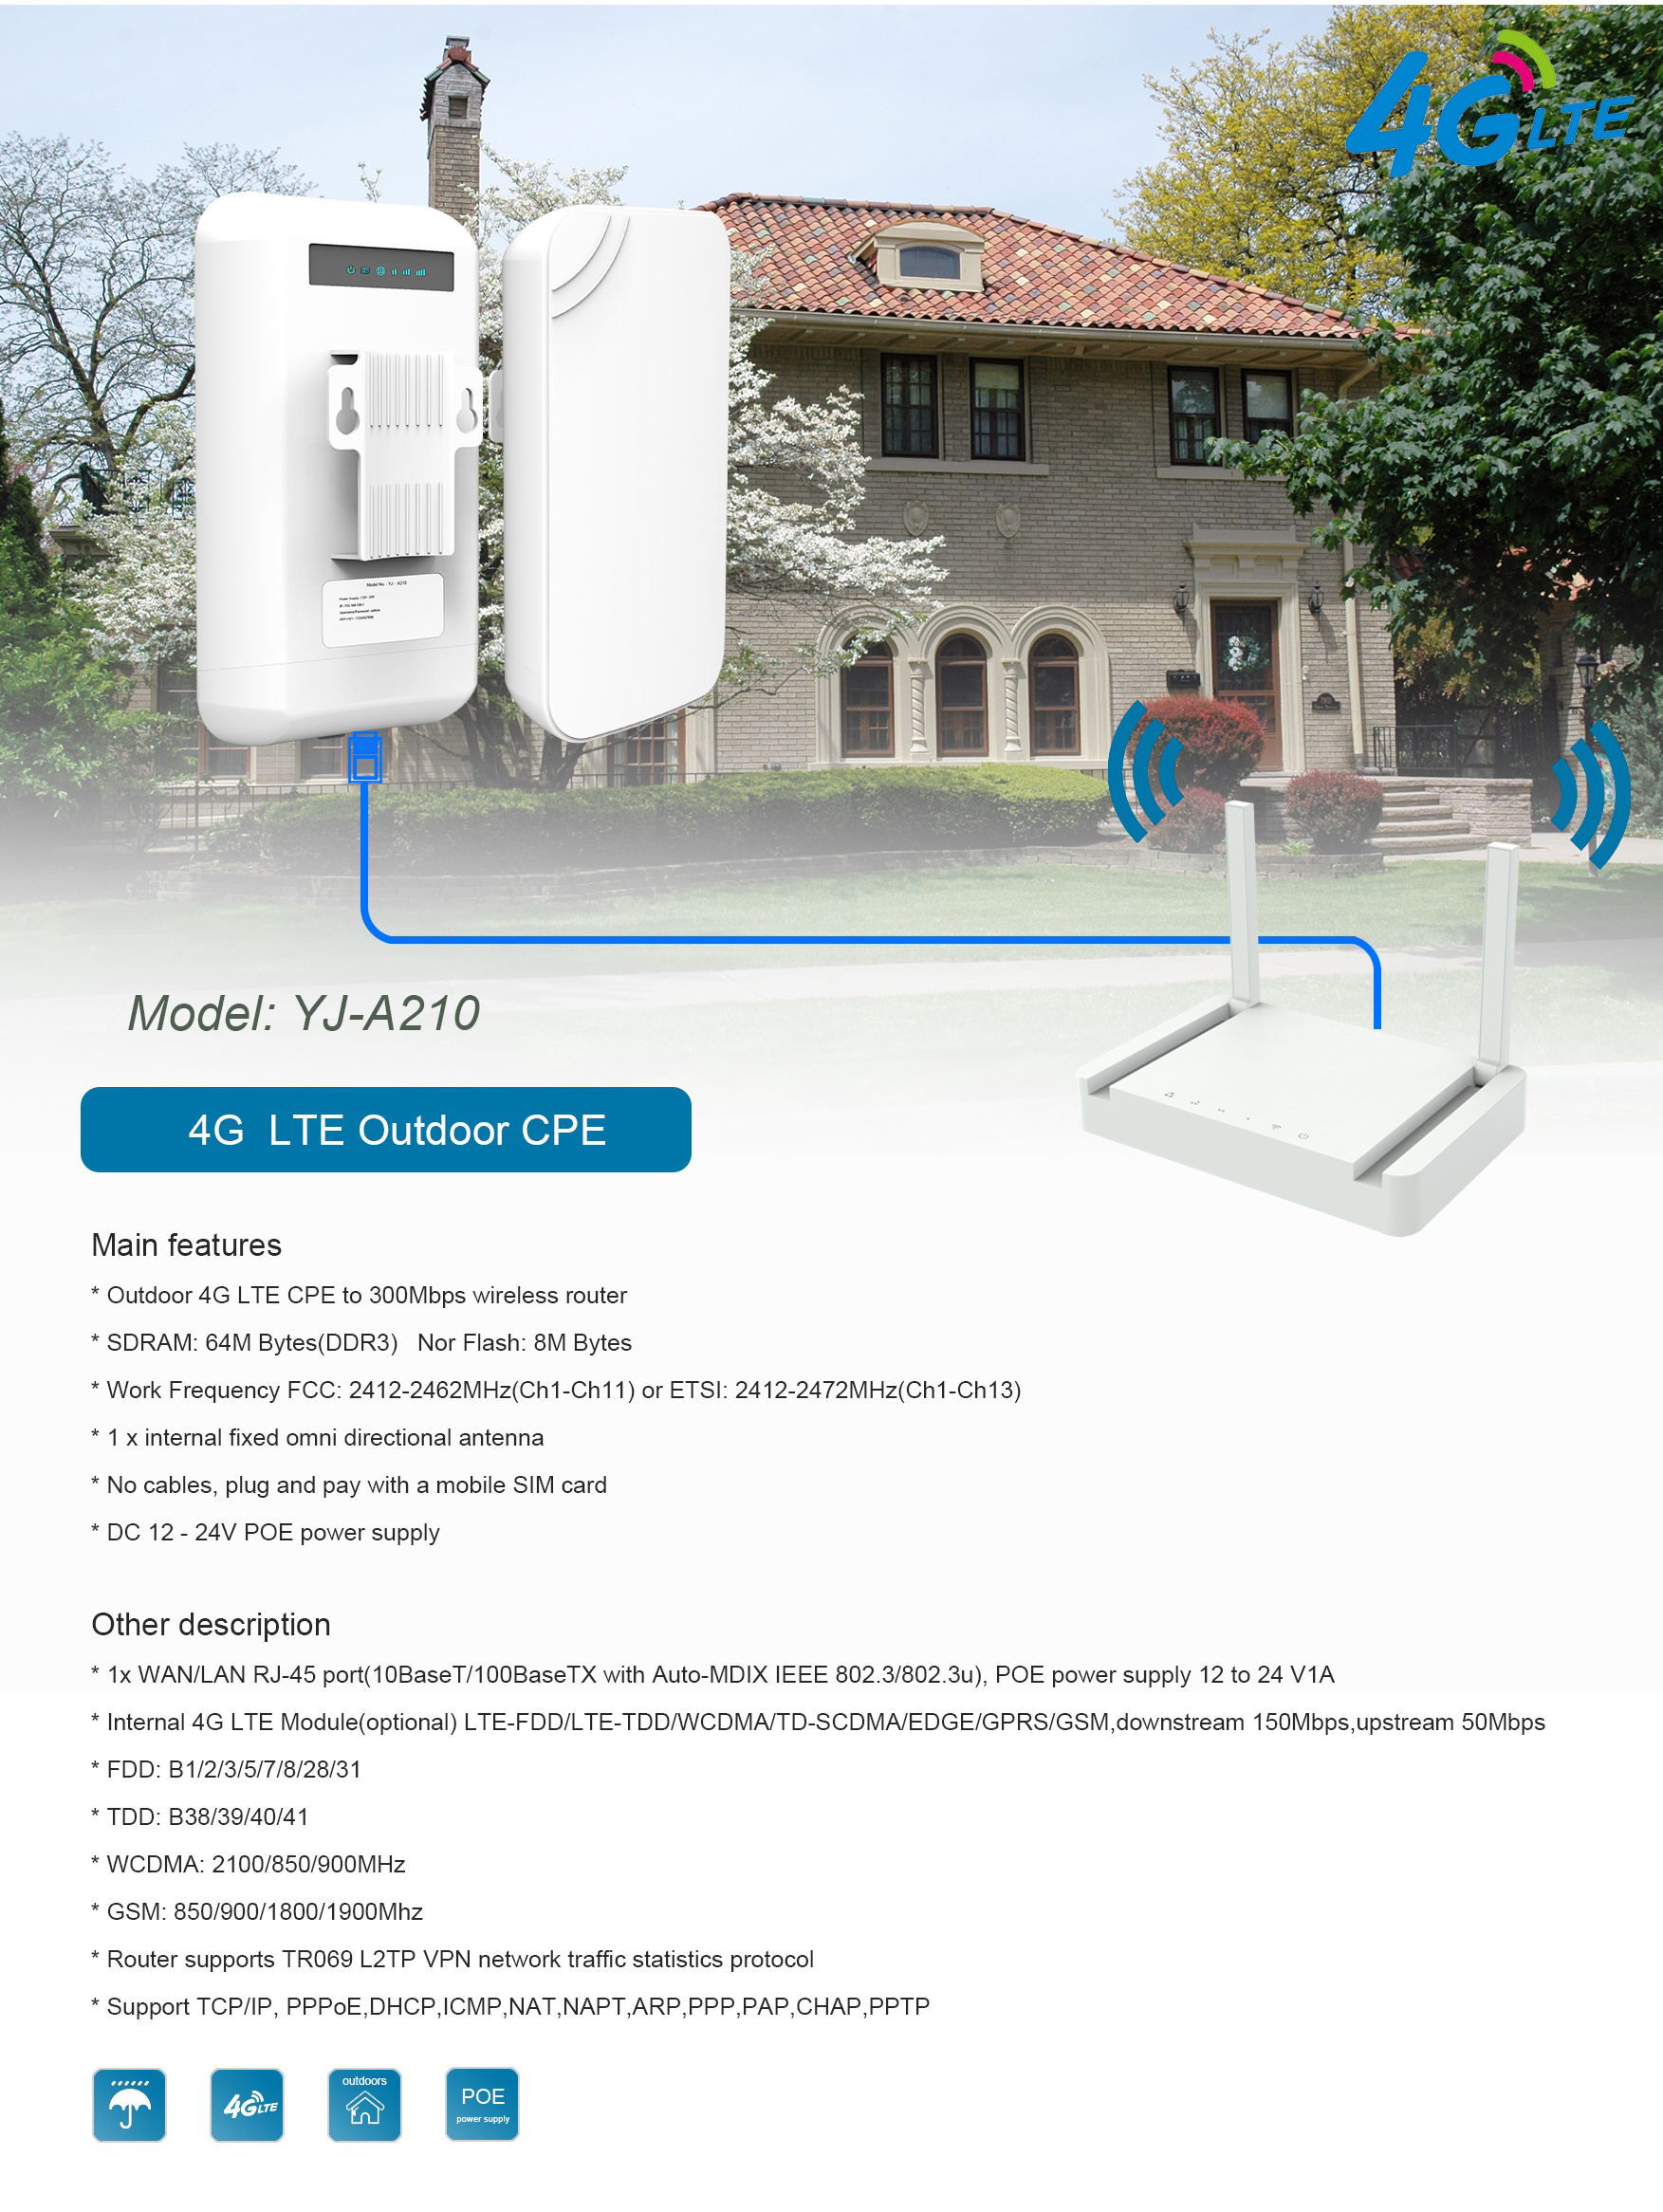 4G Outdoor CPE Home Router